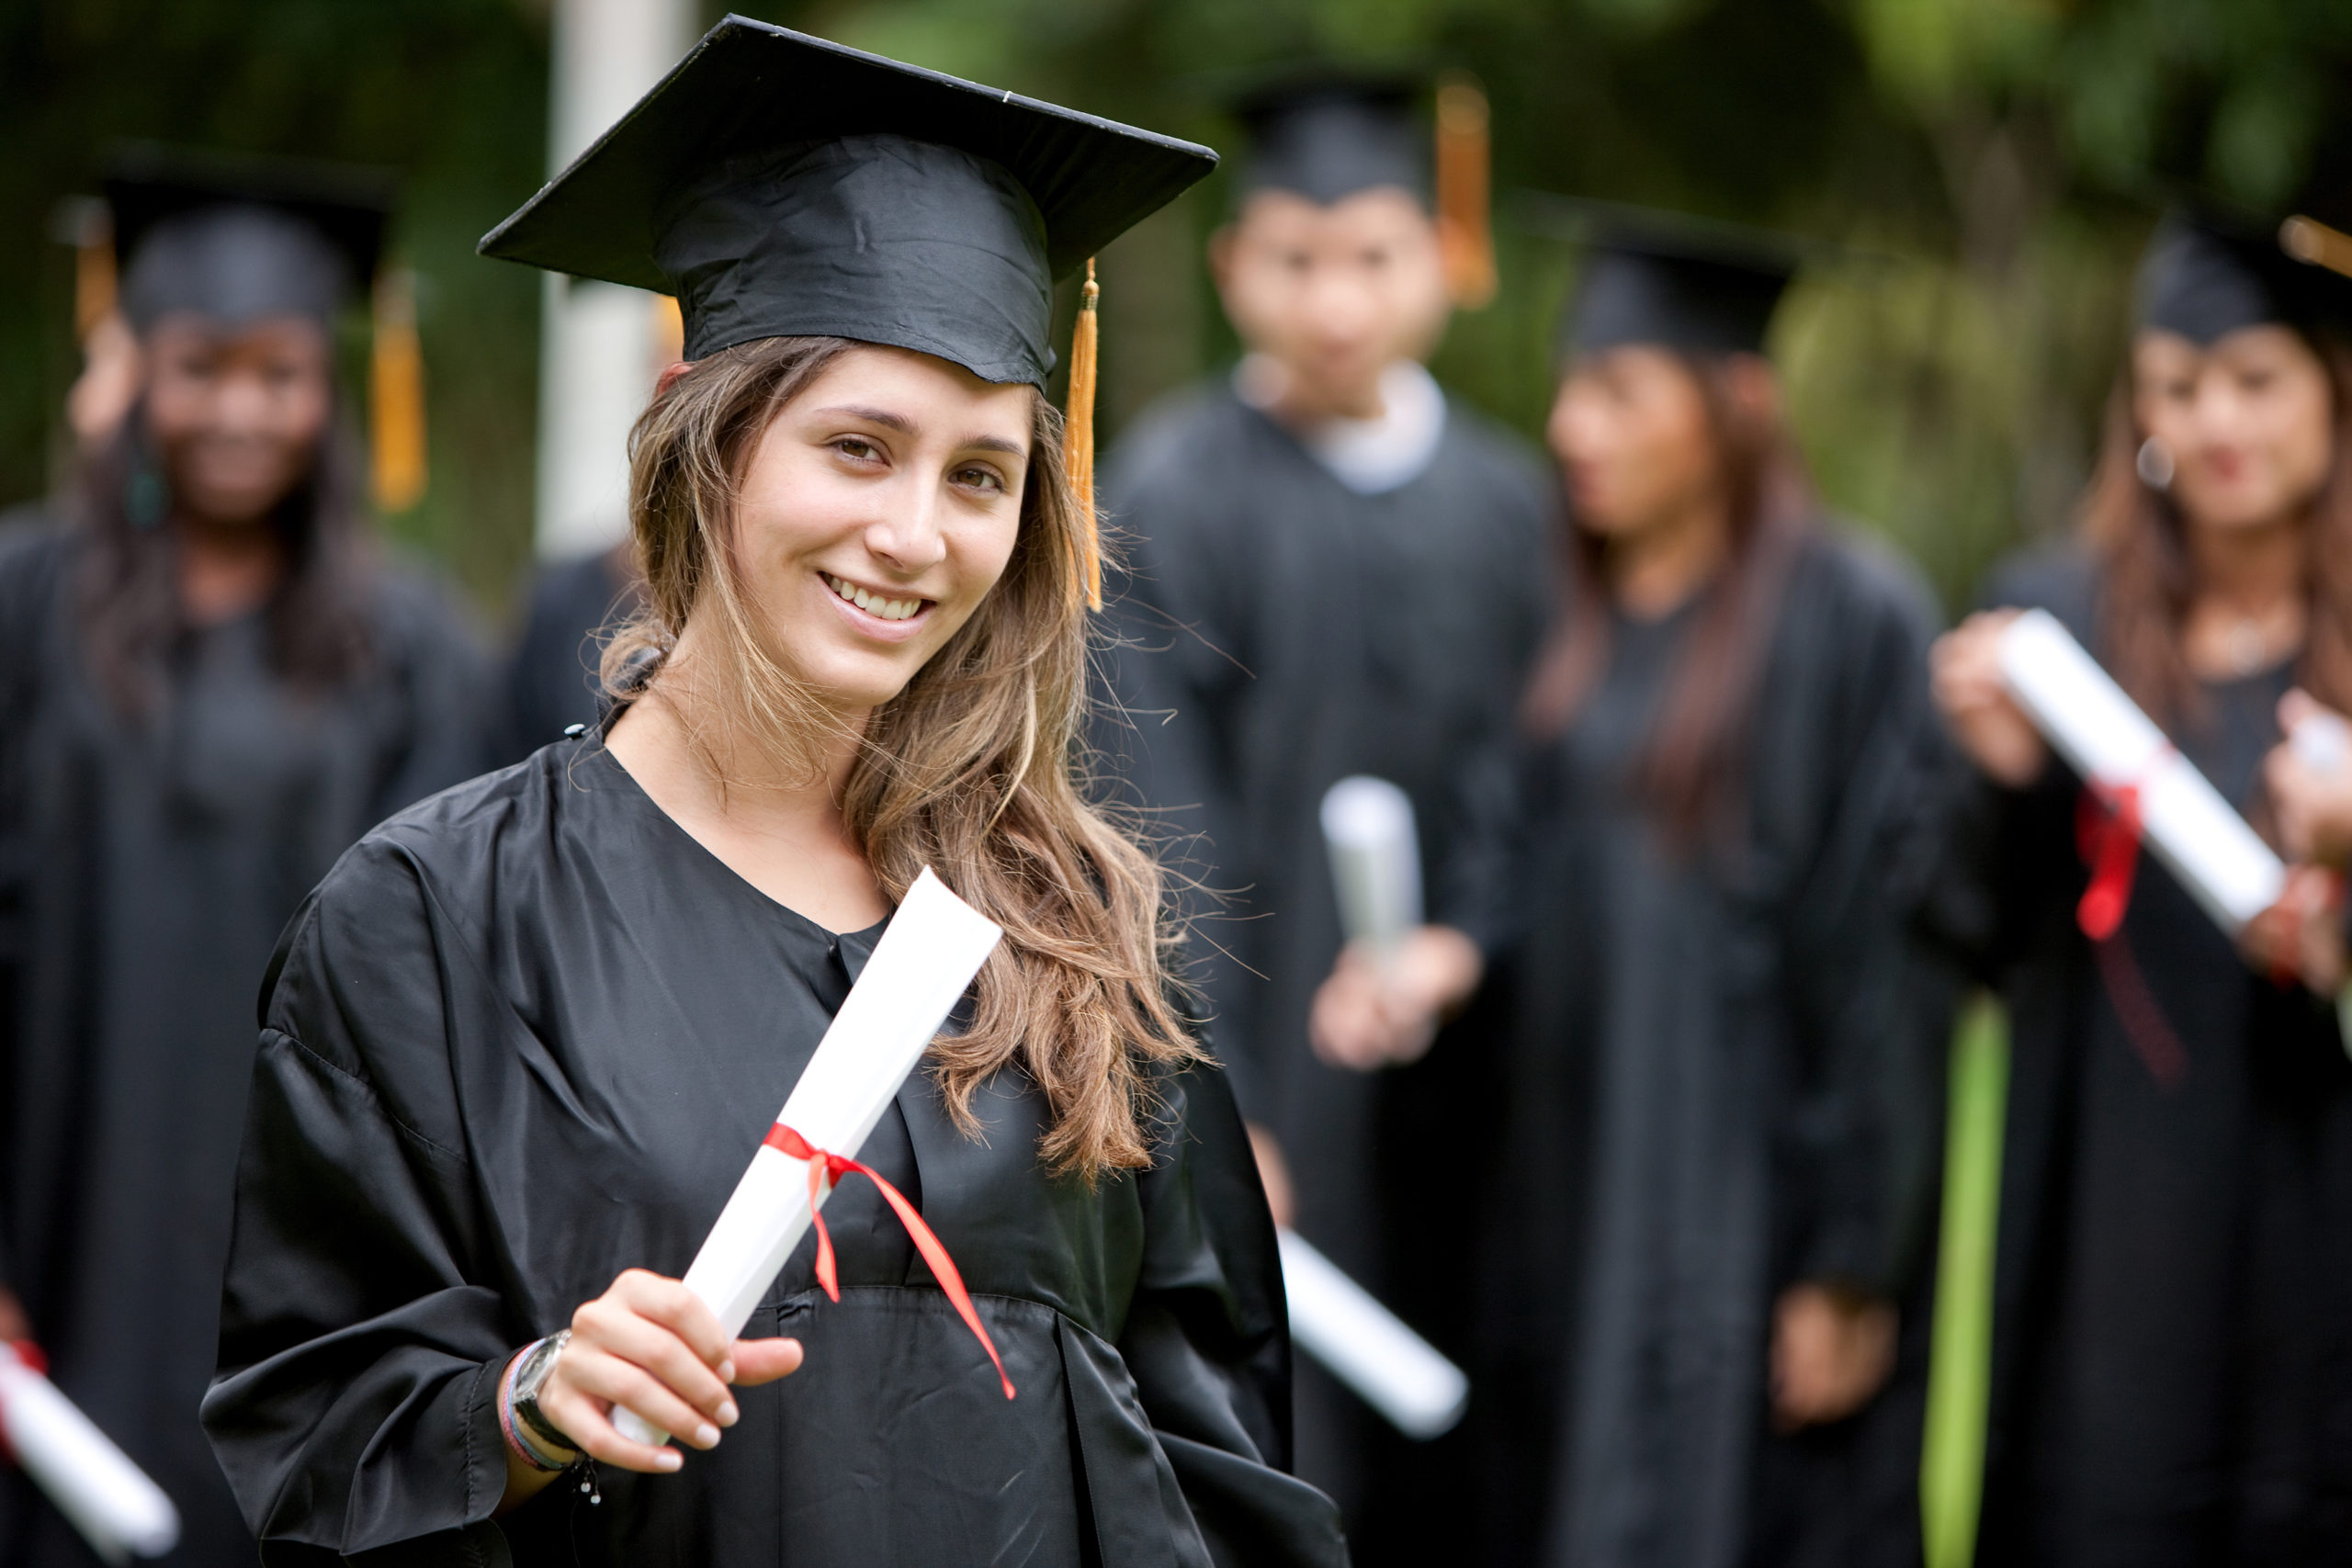 image of girl in cap and gown with diploma